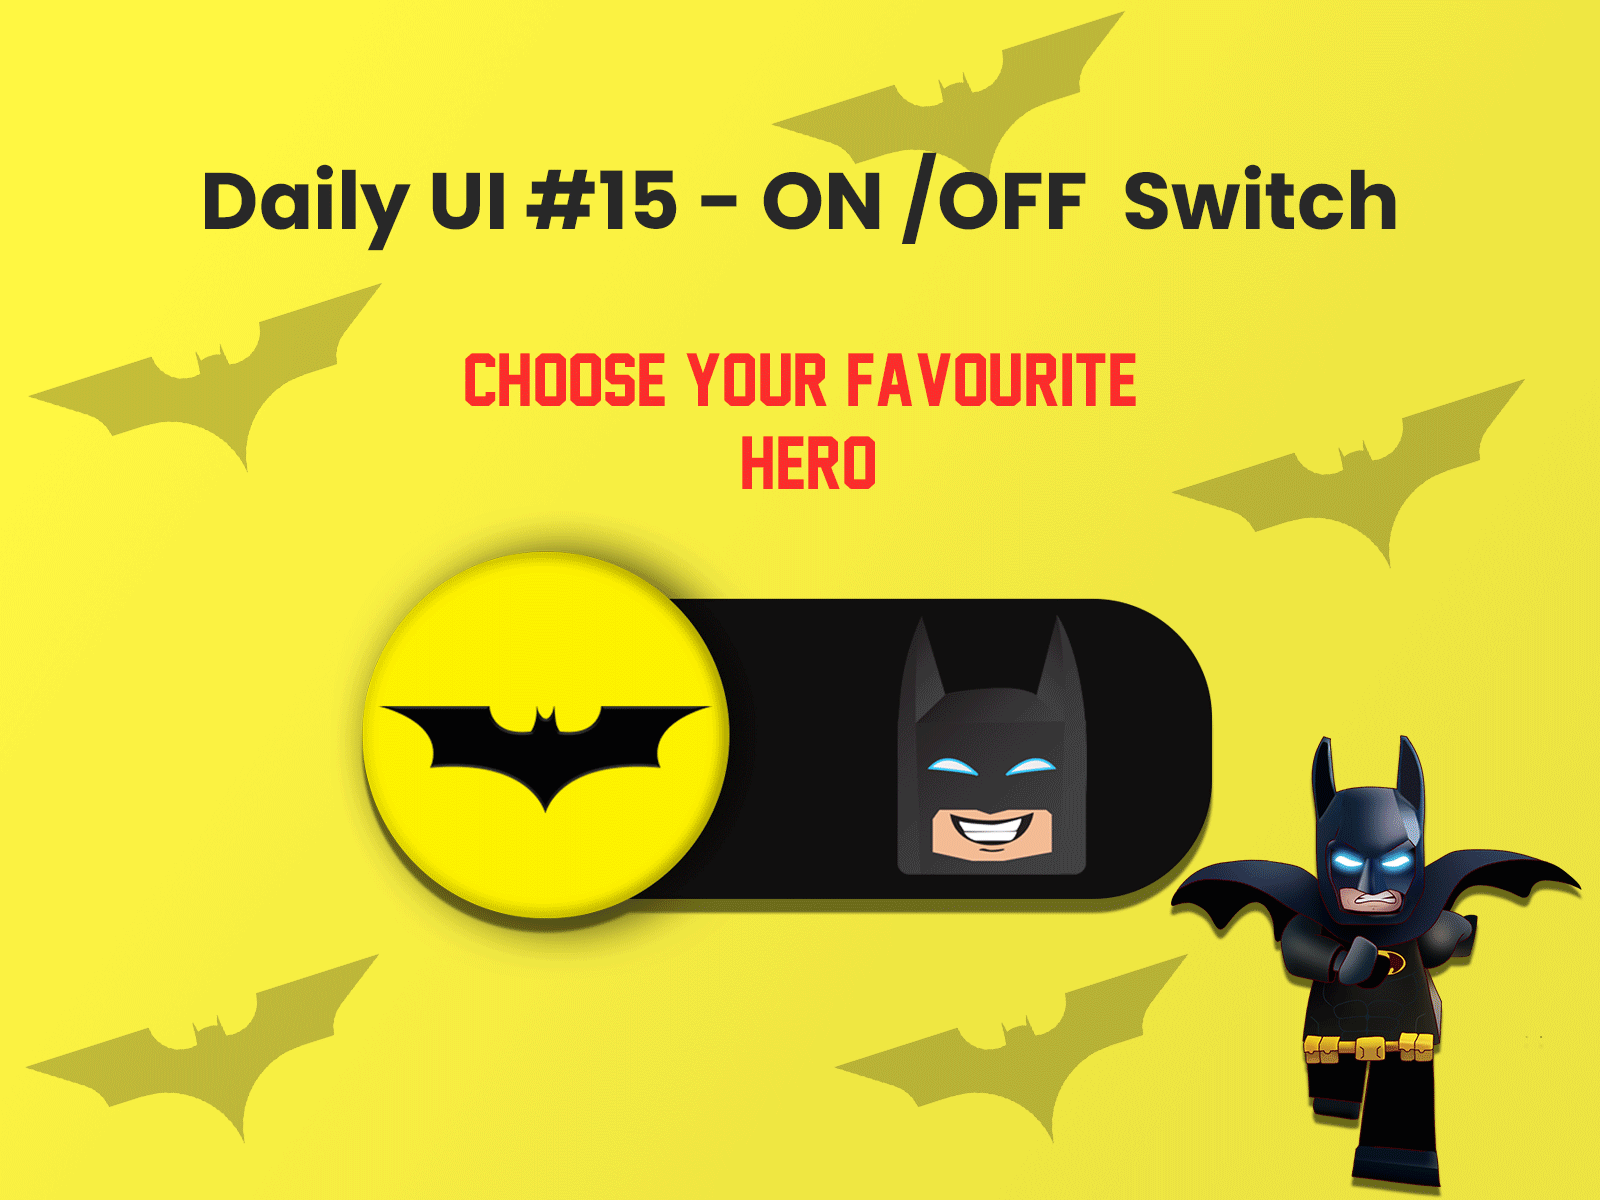 Daily UI #015 -On / Off Switch by Sathya Narayanan on Dribbble